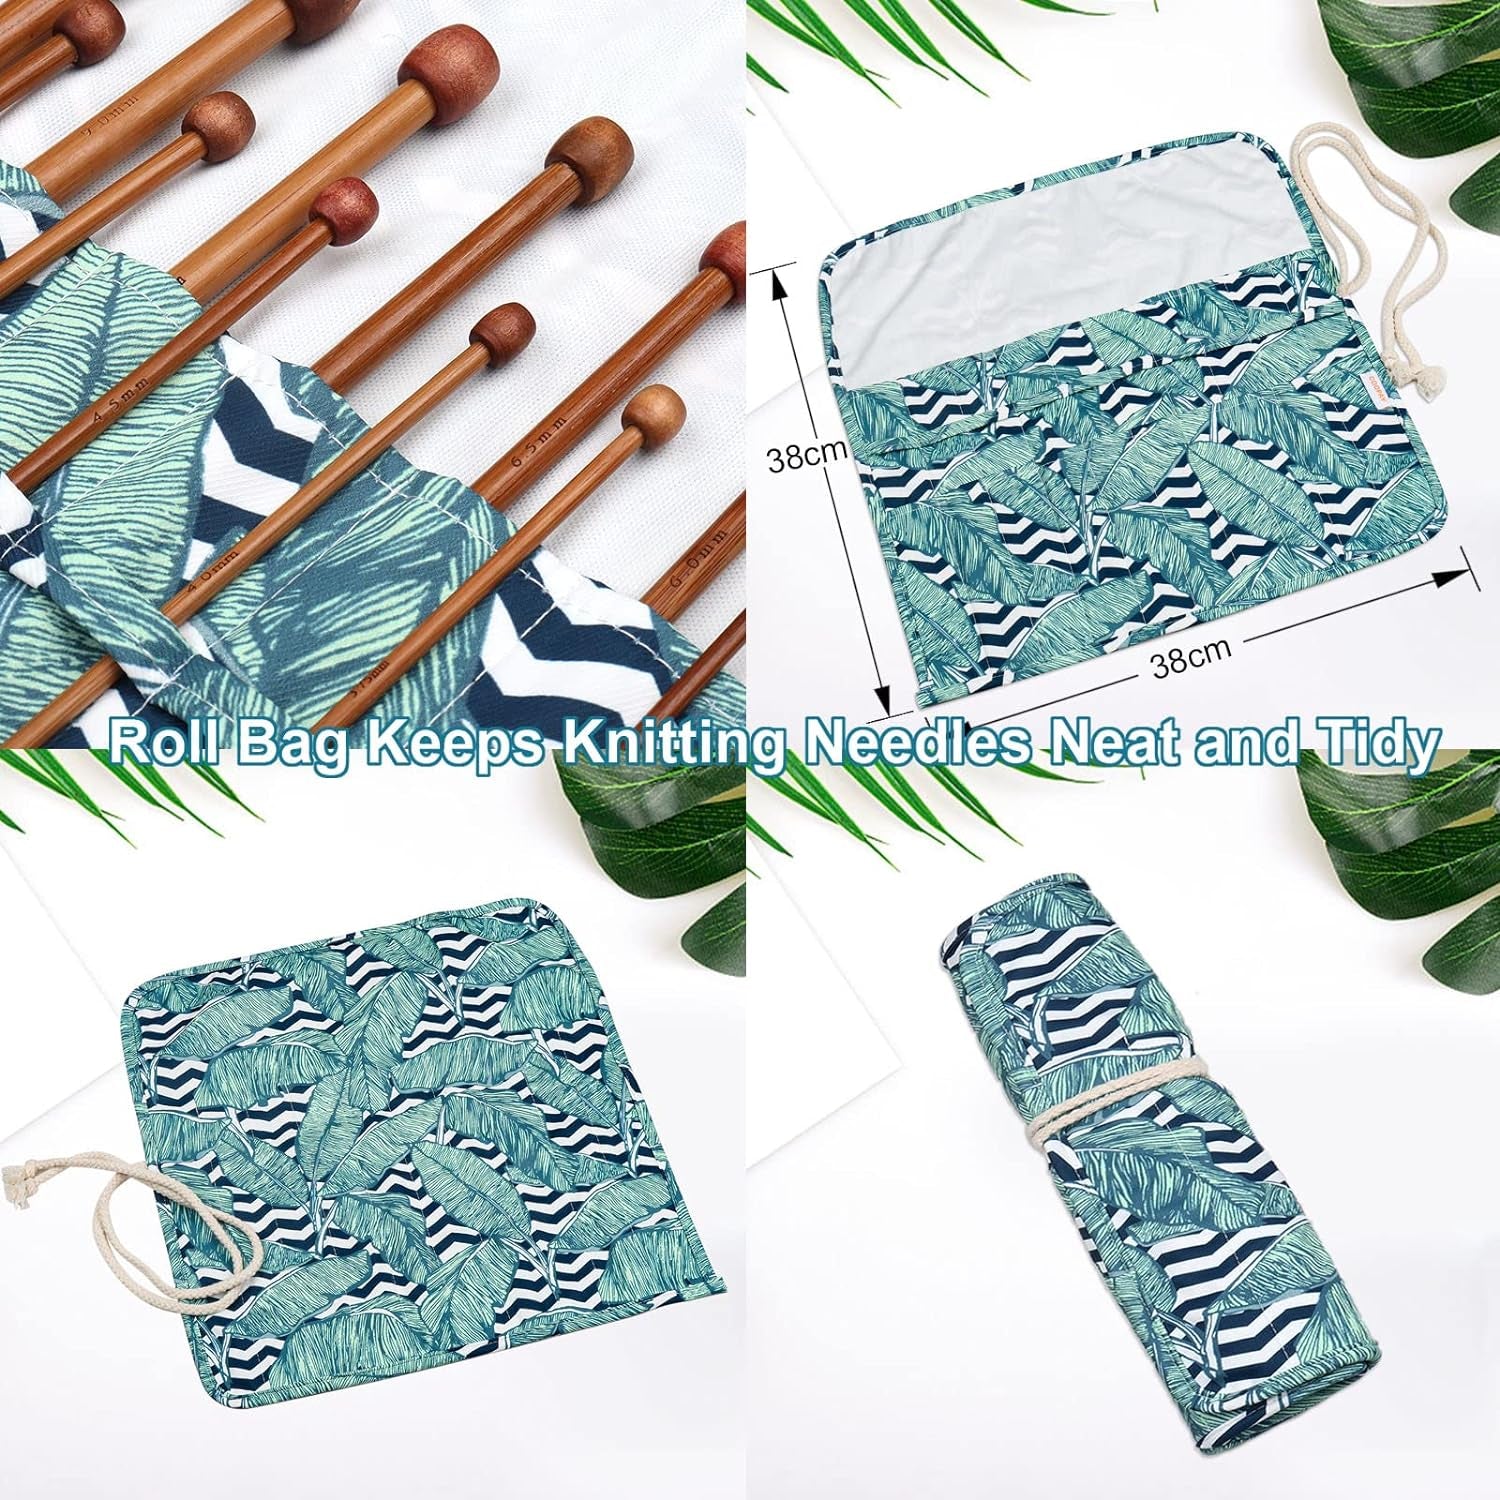 Bamboo Knitting Needles 18 Pairs Knitting Needles Set - 10 Inches Wooden Knitting Needle Single Point Knitting Needles with Roll Bag - Portable Knitting Needle Set for Beginners (2Mm - 10Mm)